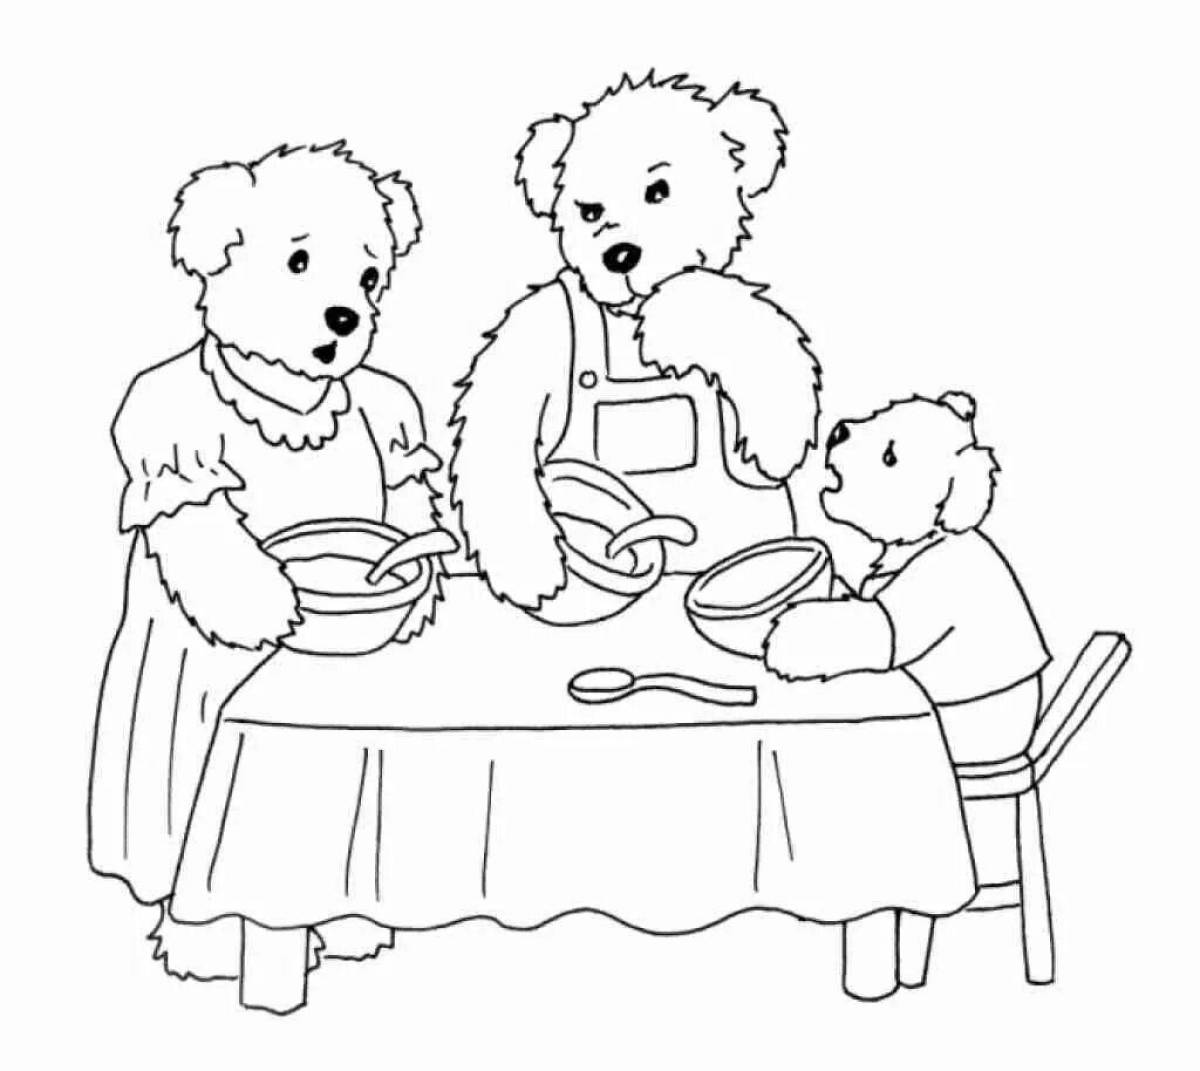 Color-explosion 3 bears coloring page